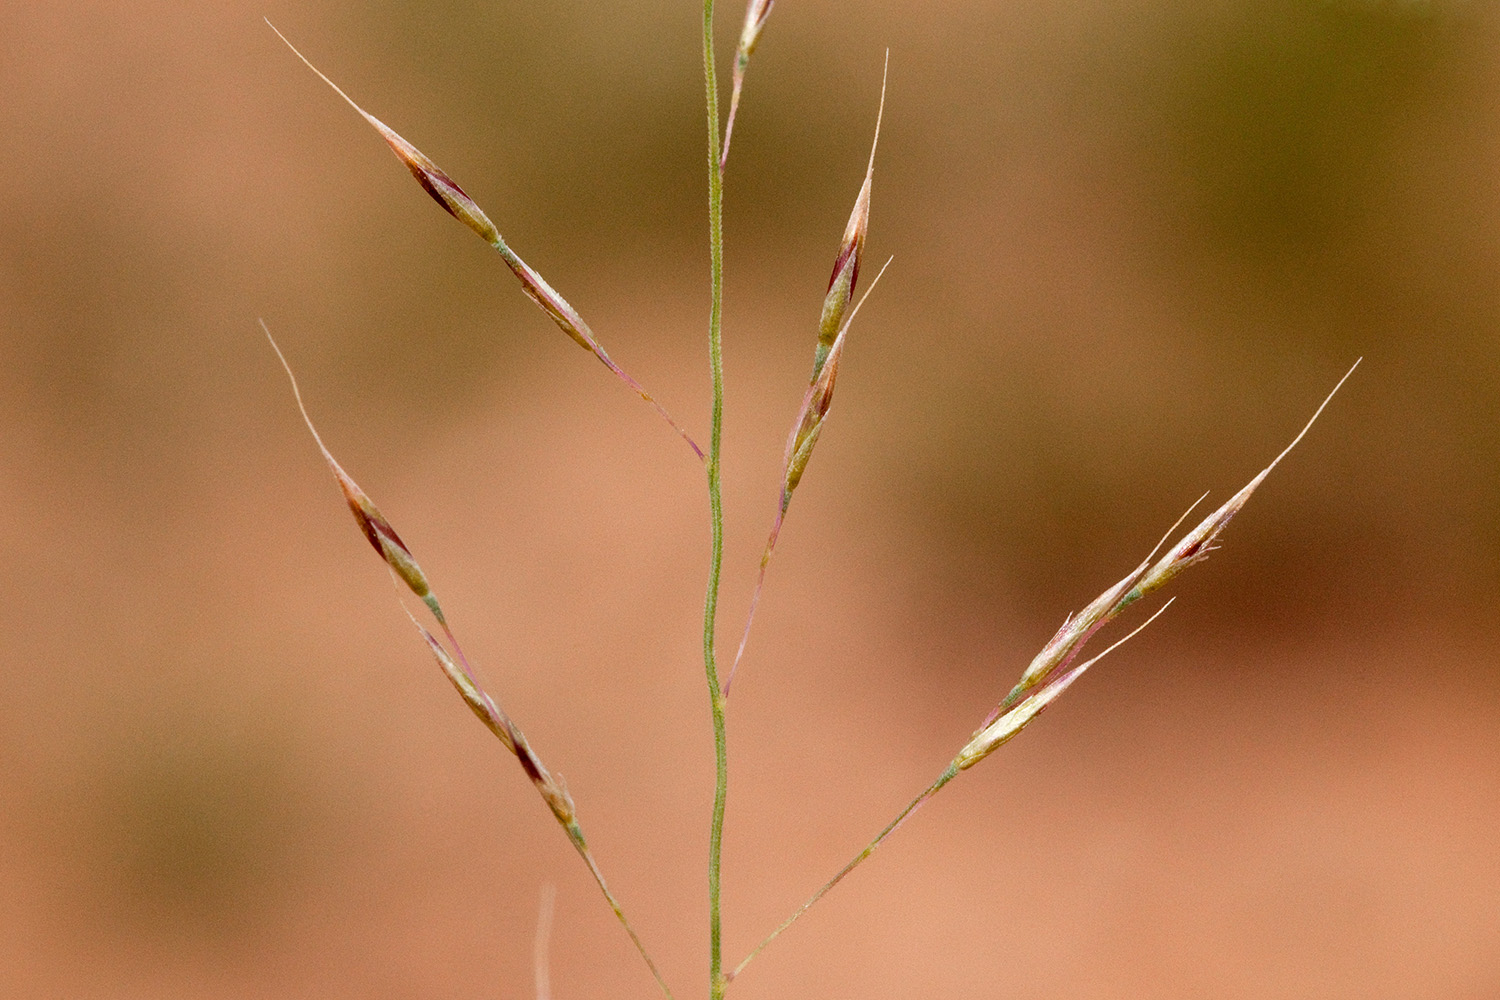 Reddish-greenish seeds on a loosely branched panicle